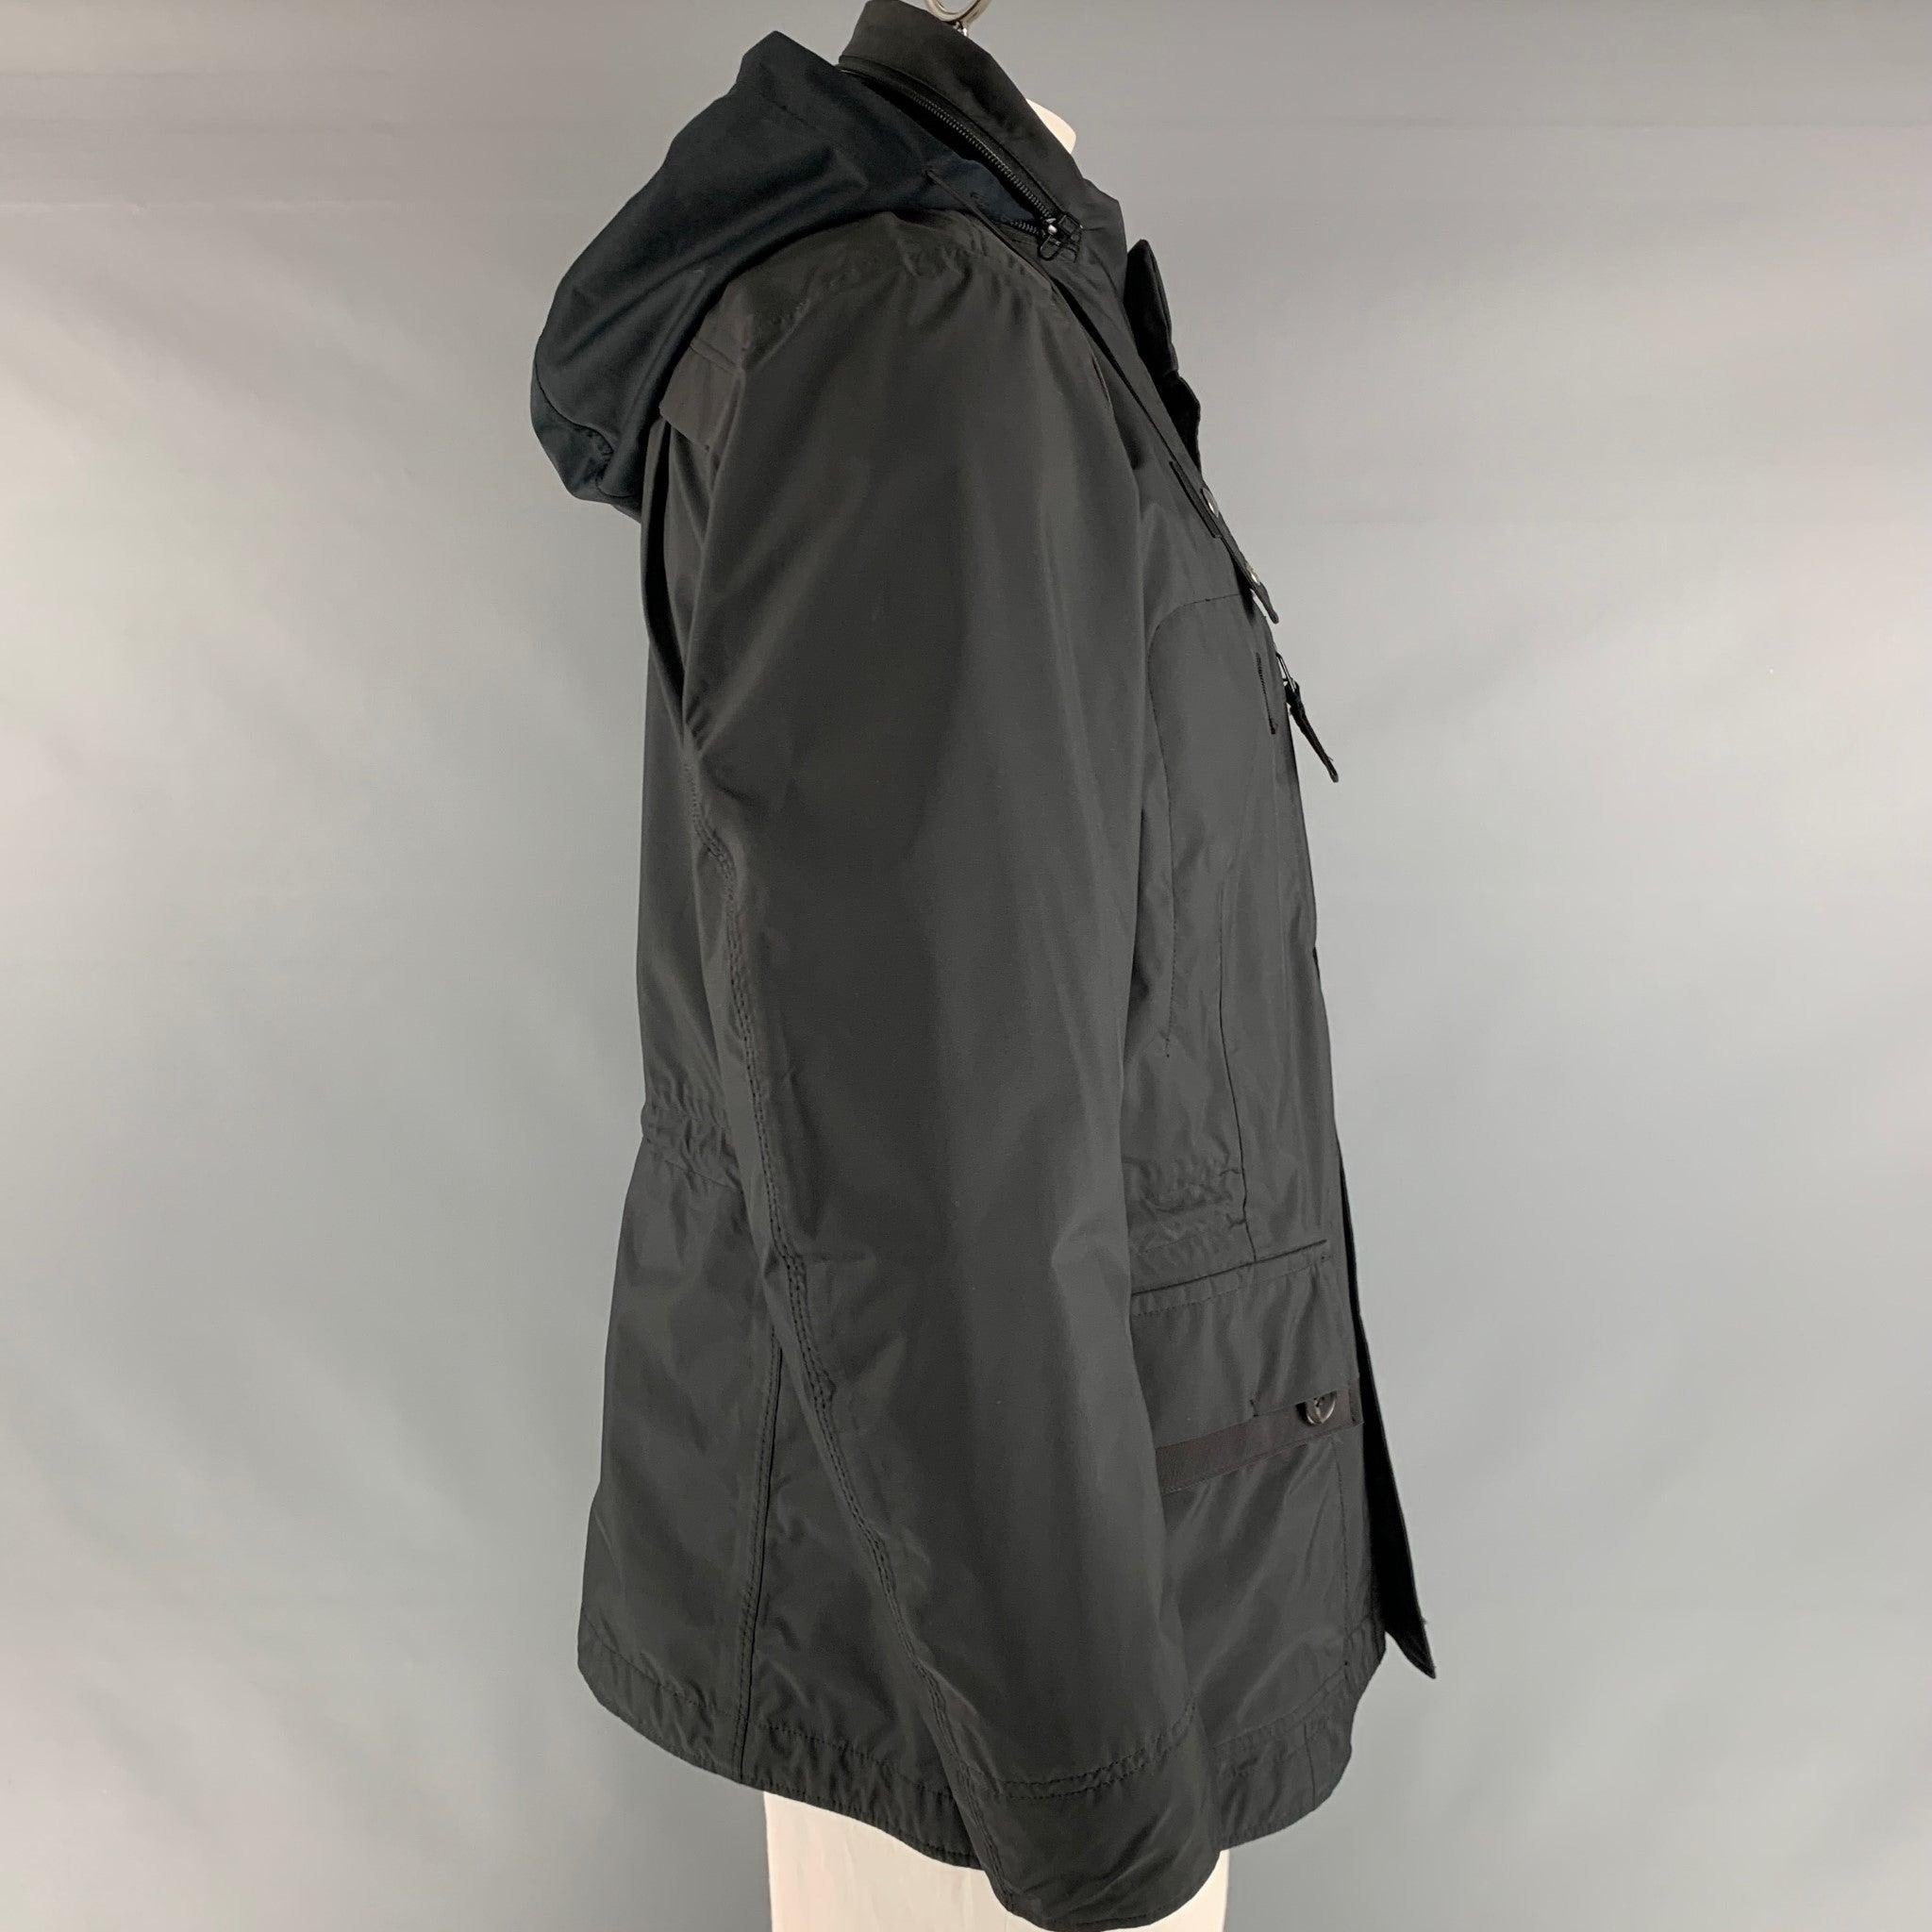 ISSEY MIYAKE jacket comes in a black polyester featuring a windbreaker style, loose fit, hooded, patch wit flap pockets, drawstring at waistband, and a zip up closure. Made in Japan.Excellent Pre-Owned Condition. 

Marked:   3 

Measurements: 
